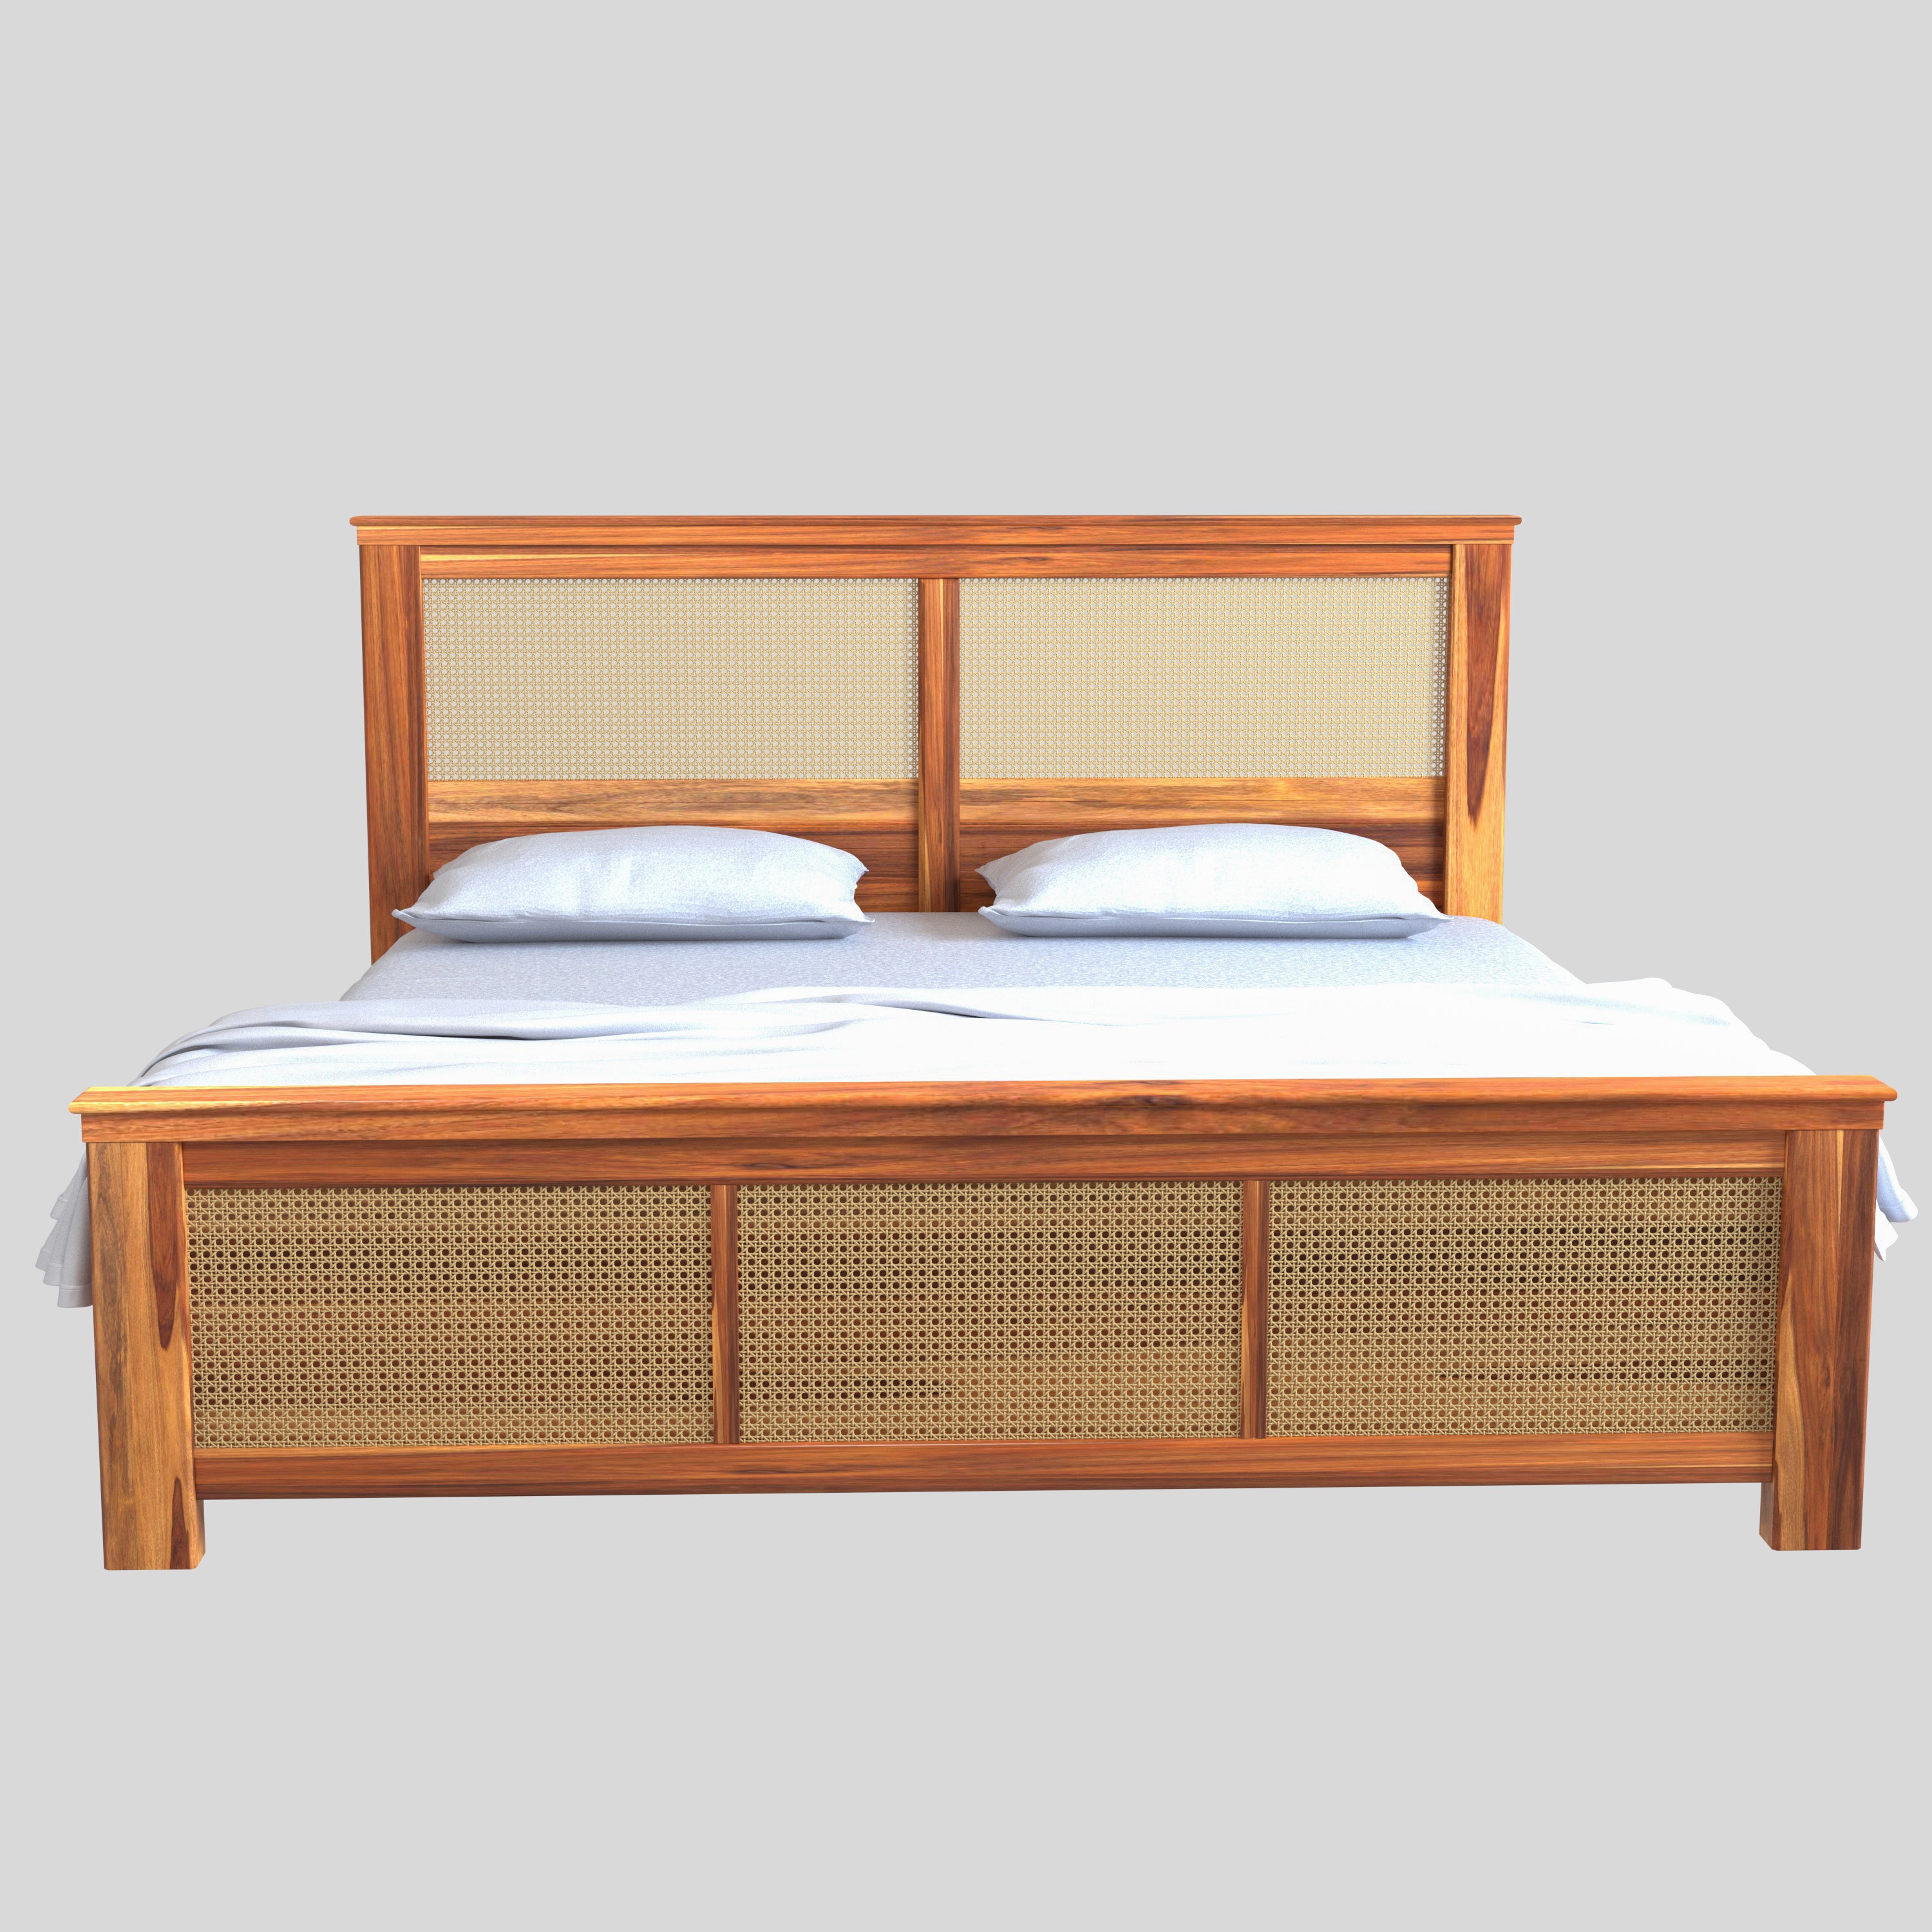 Natural Simple Handmade Classic Cane Wooden Bed for Home Bed